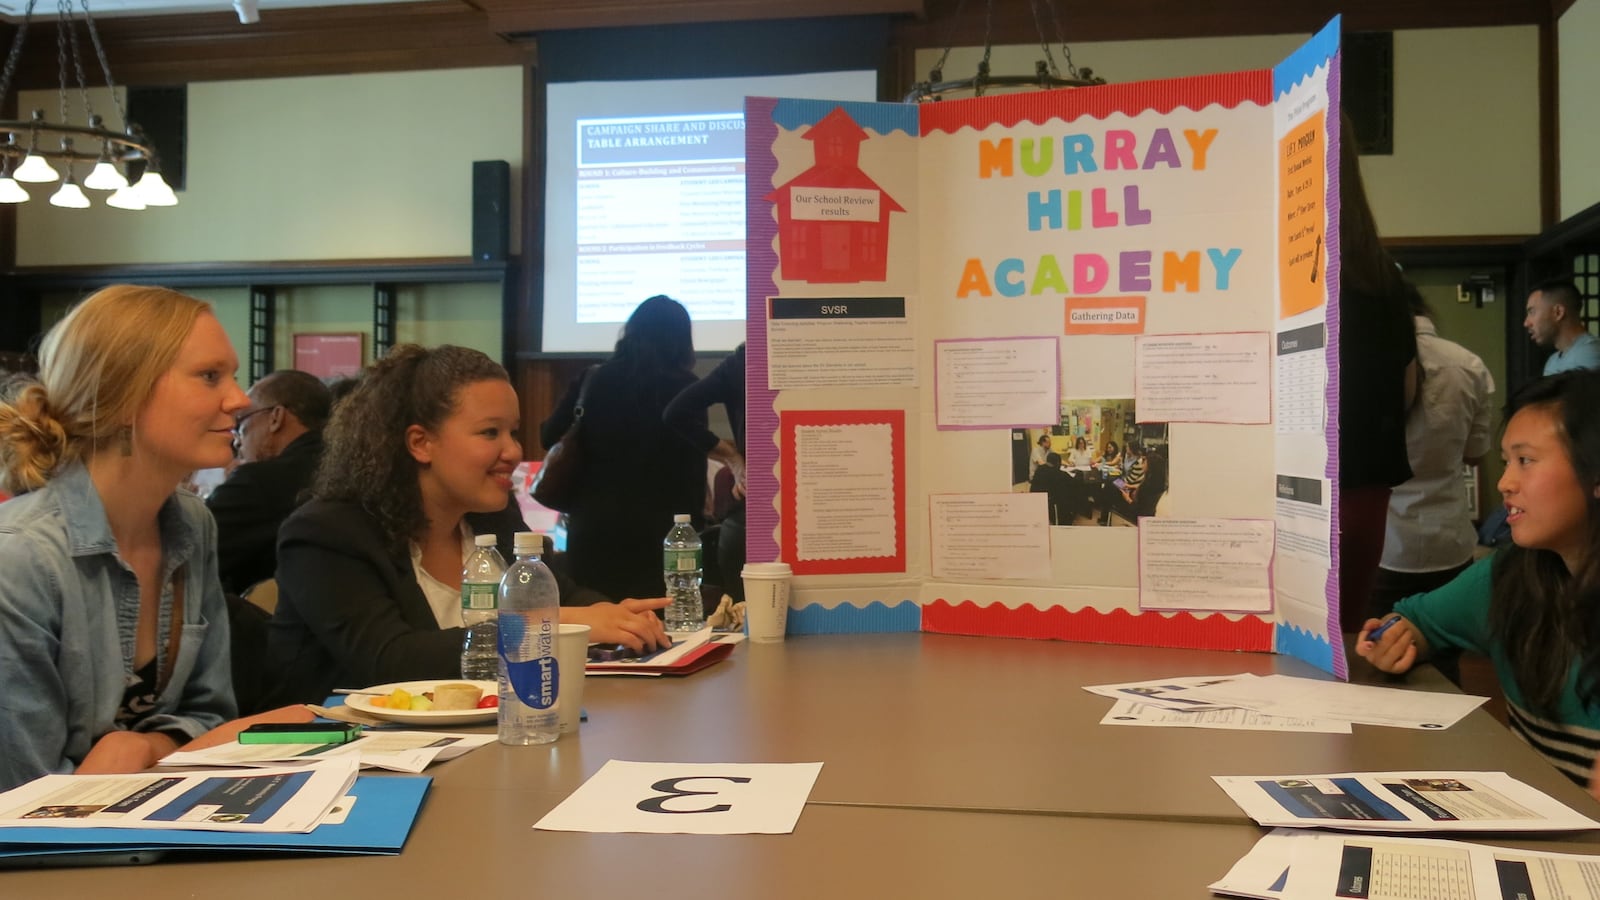 Cristal Cruz, second from left, and Salina Kuoc, right, discuss a mentoring project.